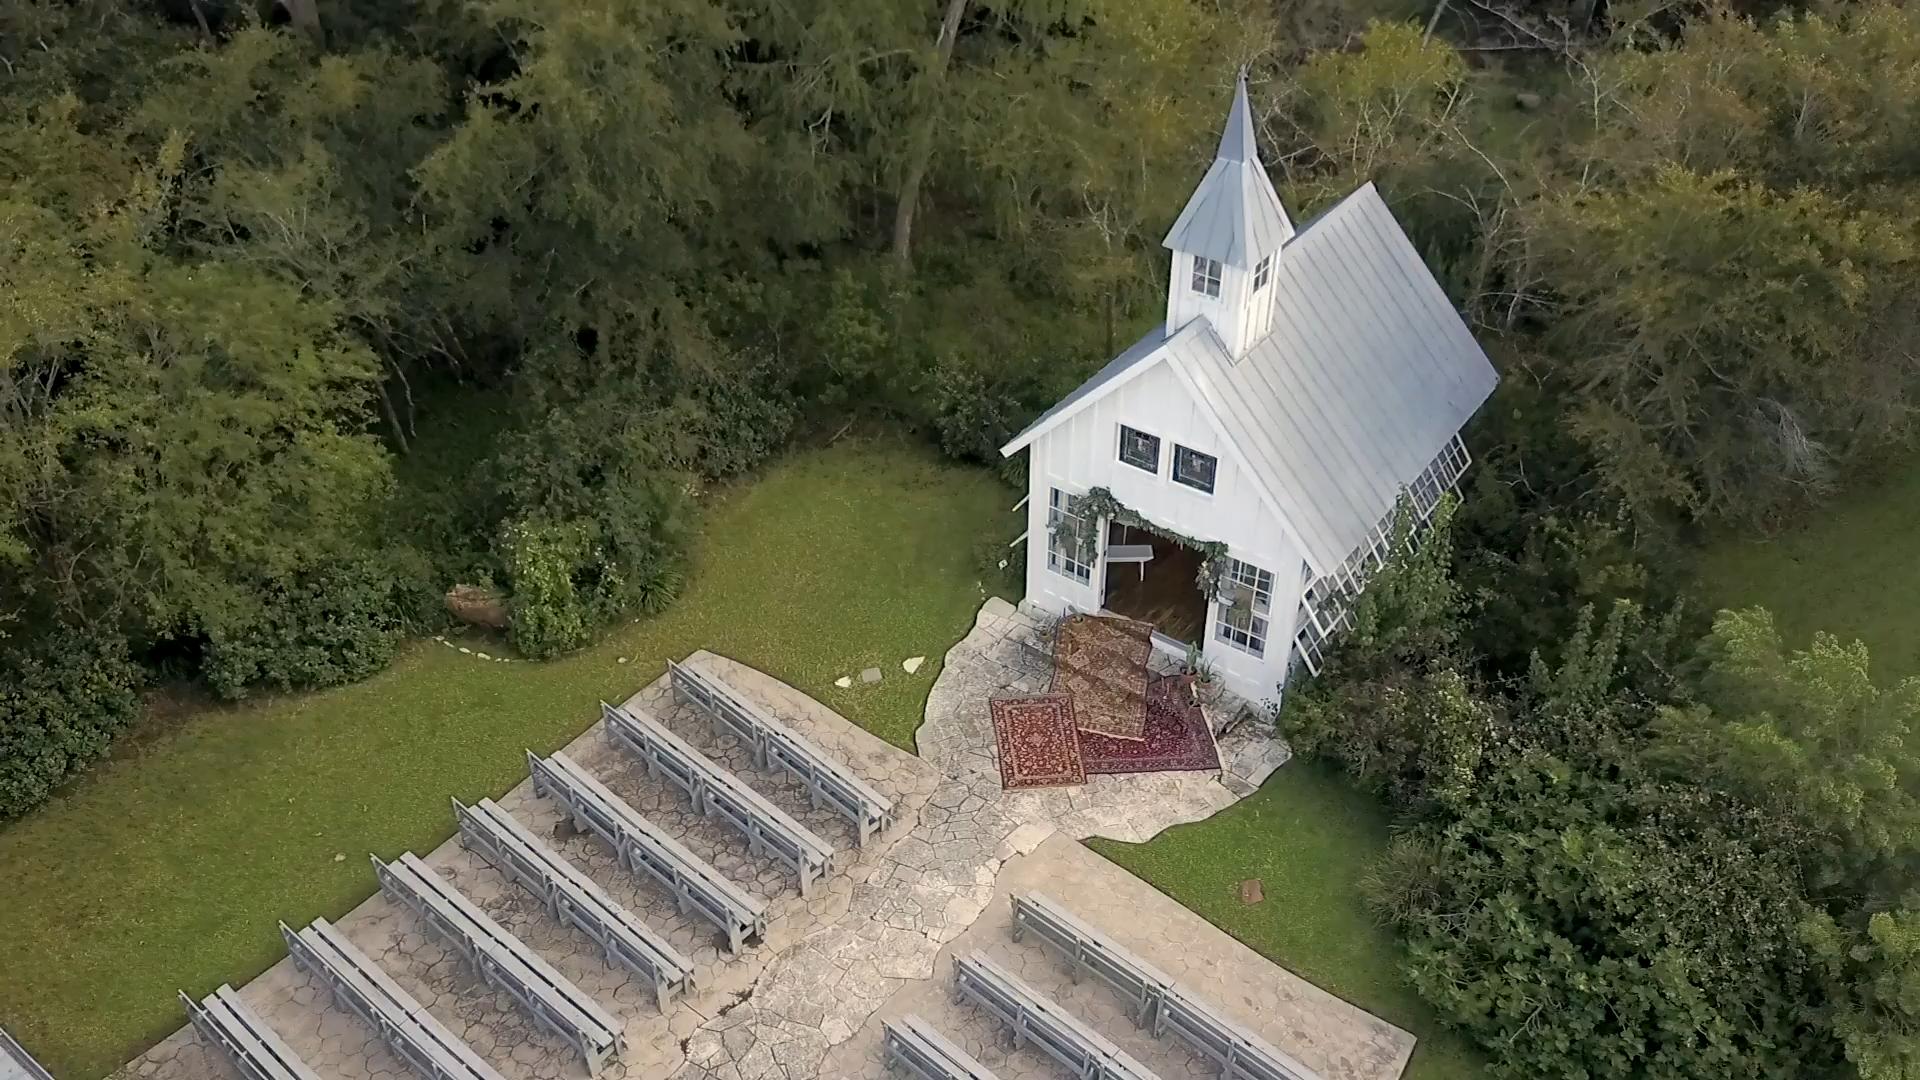 Aerial View of a little white chapel in the woods with lush green trees and grass - Houston Wedding Venue